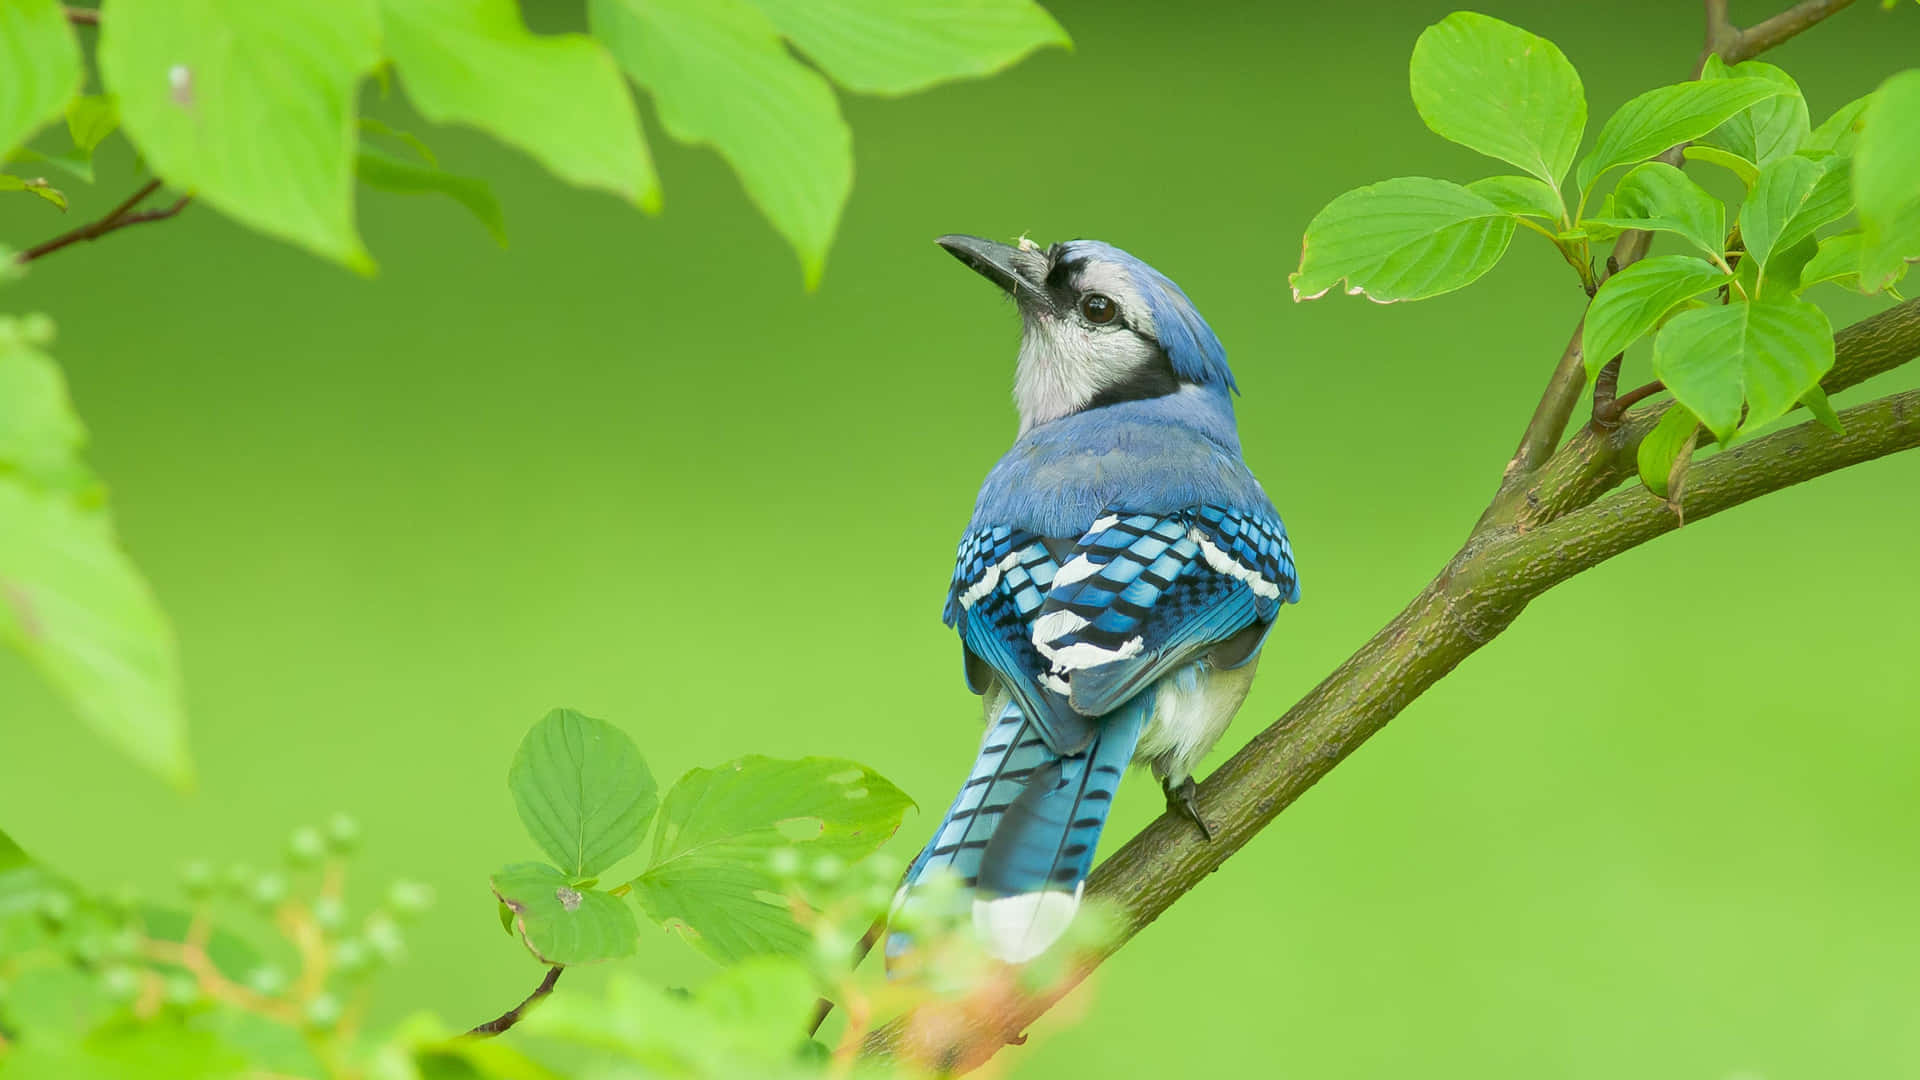 "A Blue Jay Looking Away in a Sunny Setting"